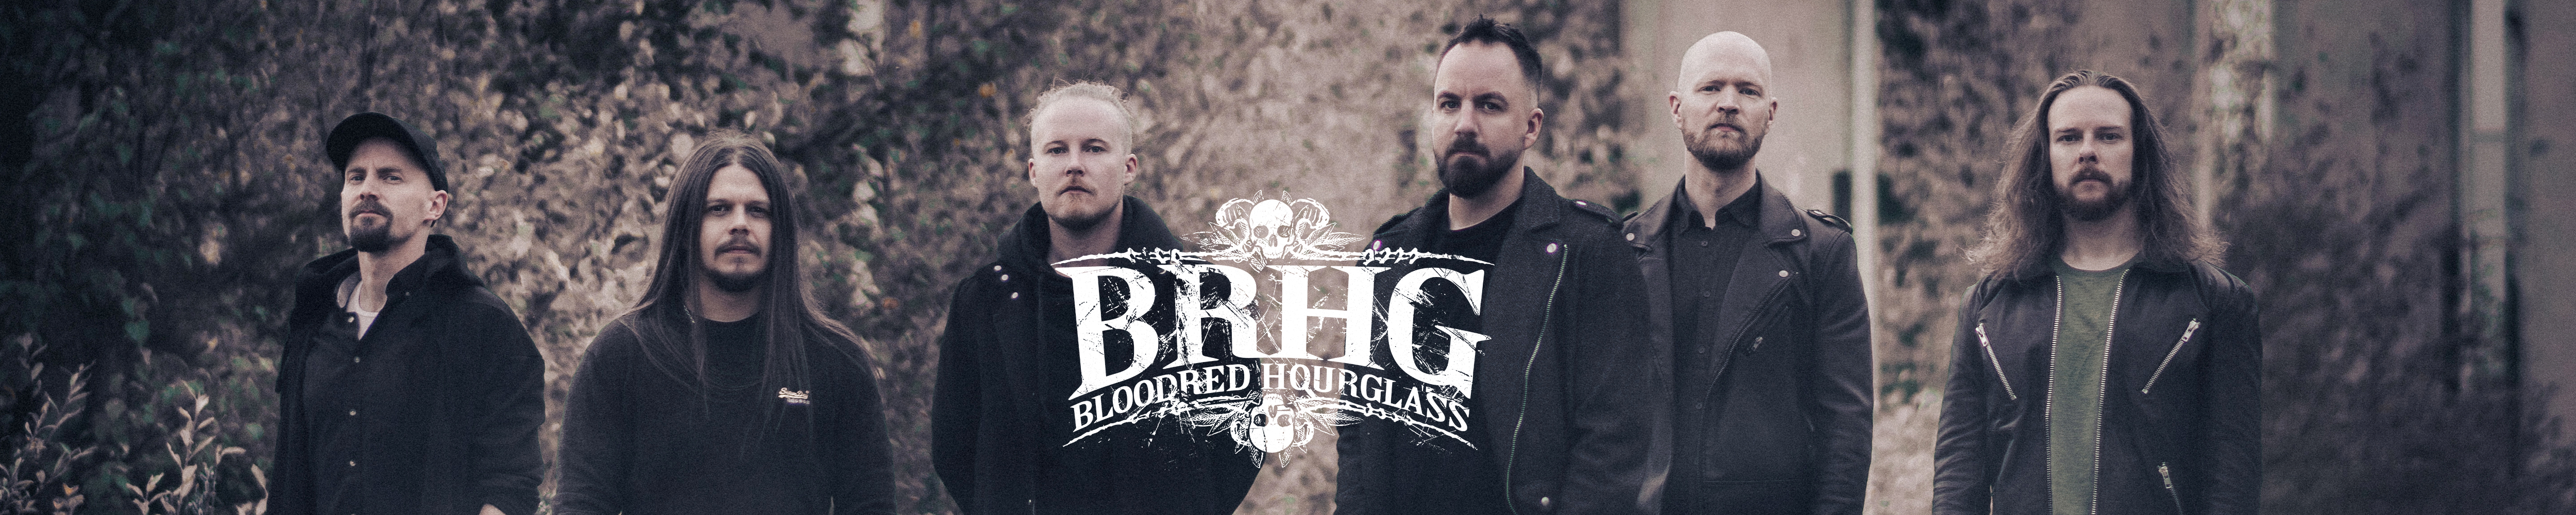 Bloodred Hourglass